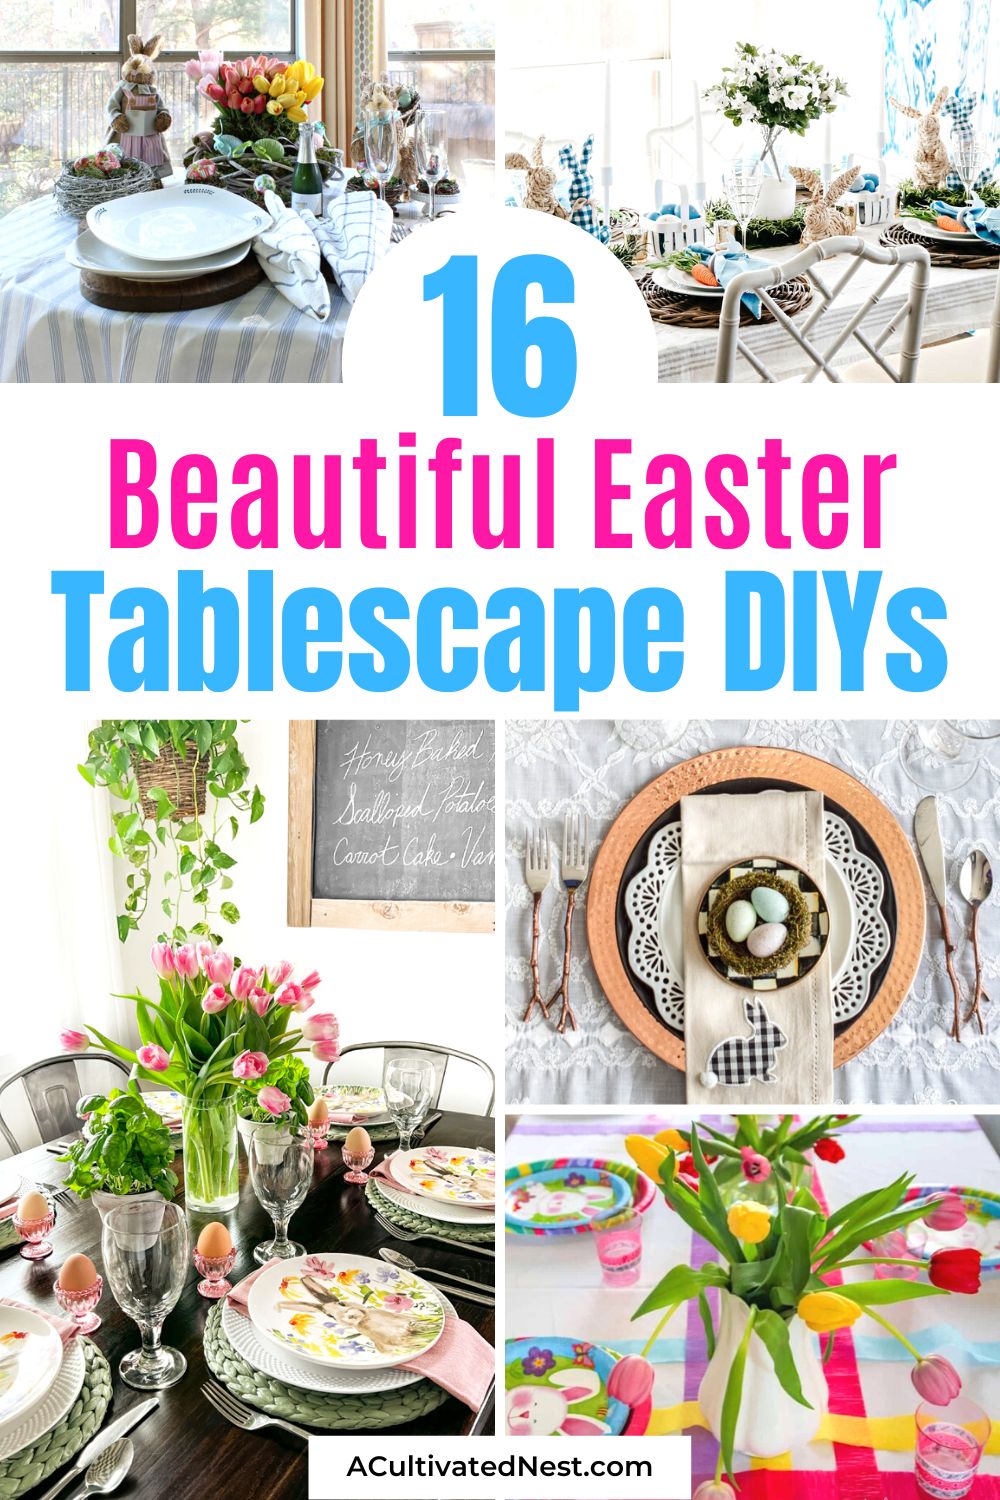 16 Beautiful DIY Easter Tablescape Ideas- Elevate your Easter celebration with these beautiful DIY Easter tablescape ideas! Transform your dining table into a masterpiece with creative decorations and thoughtful spring touches. | #tablescapes #EasterDIY #EasterDecor #diyProjects #ACultivatedNest